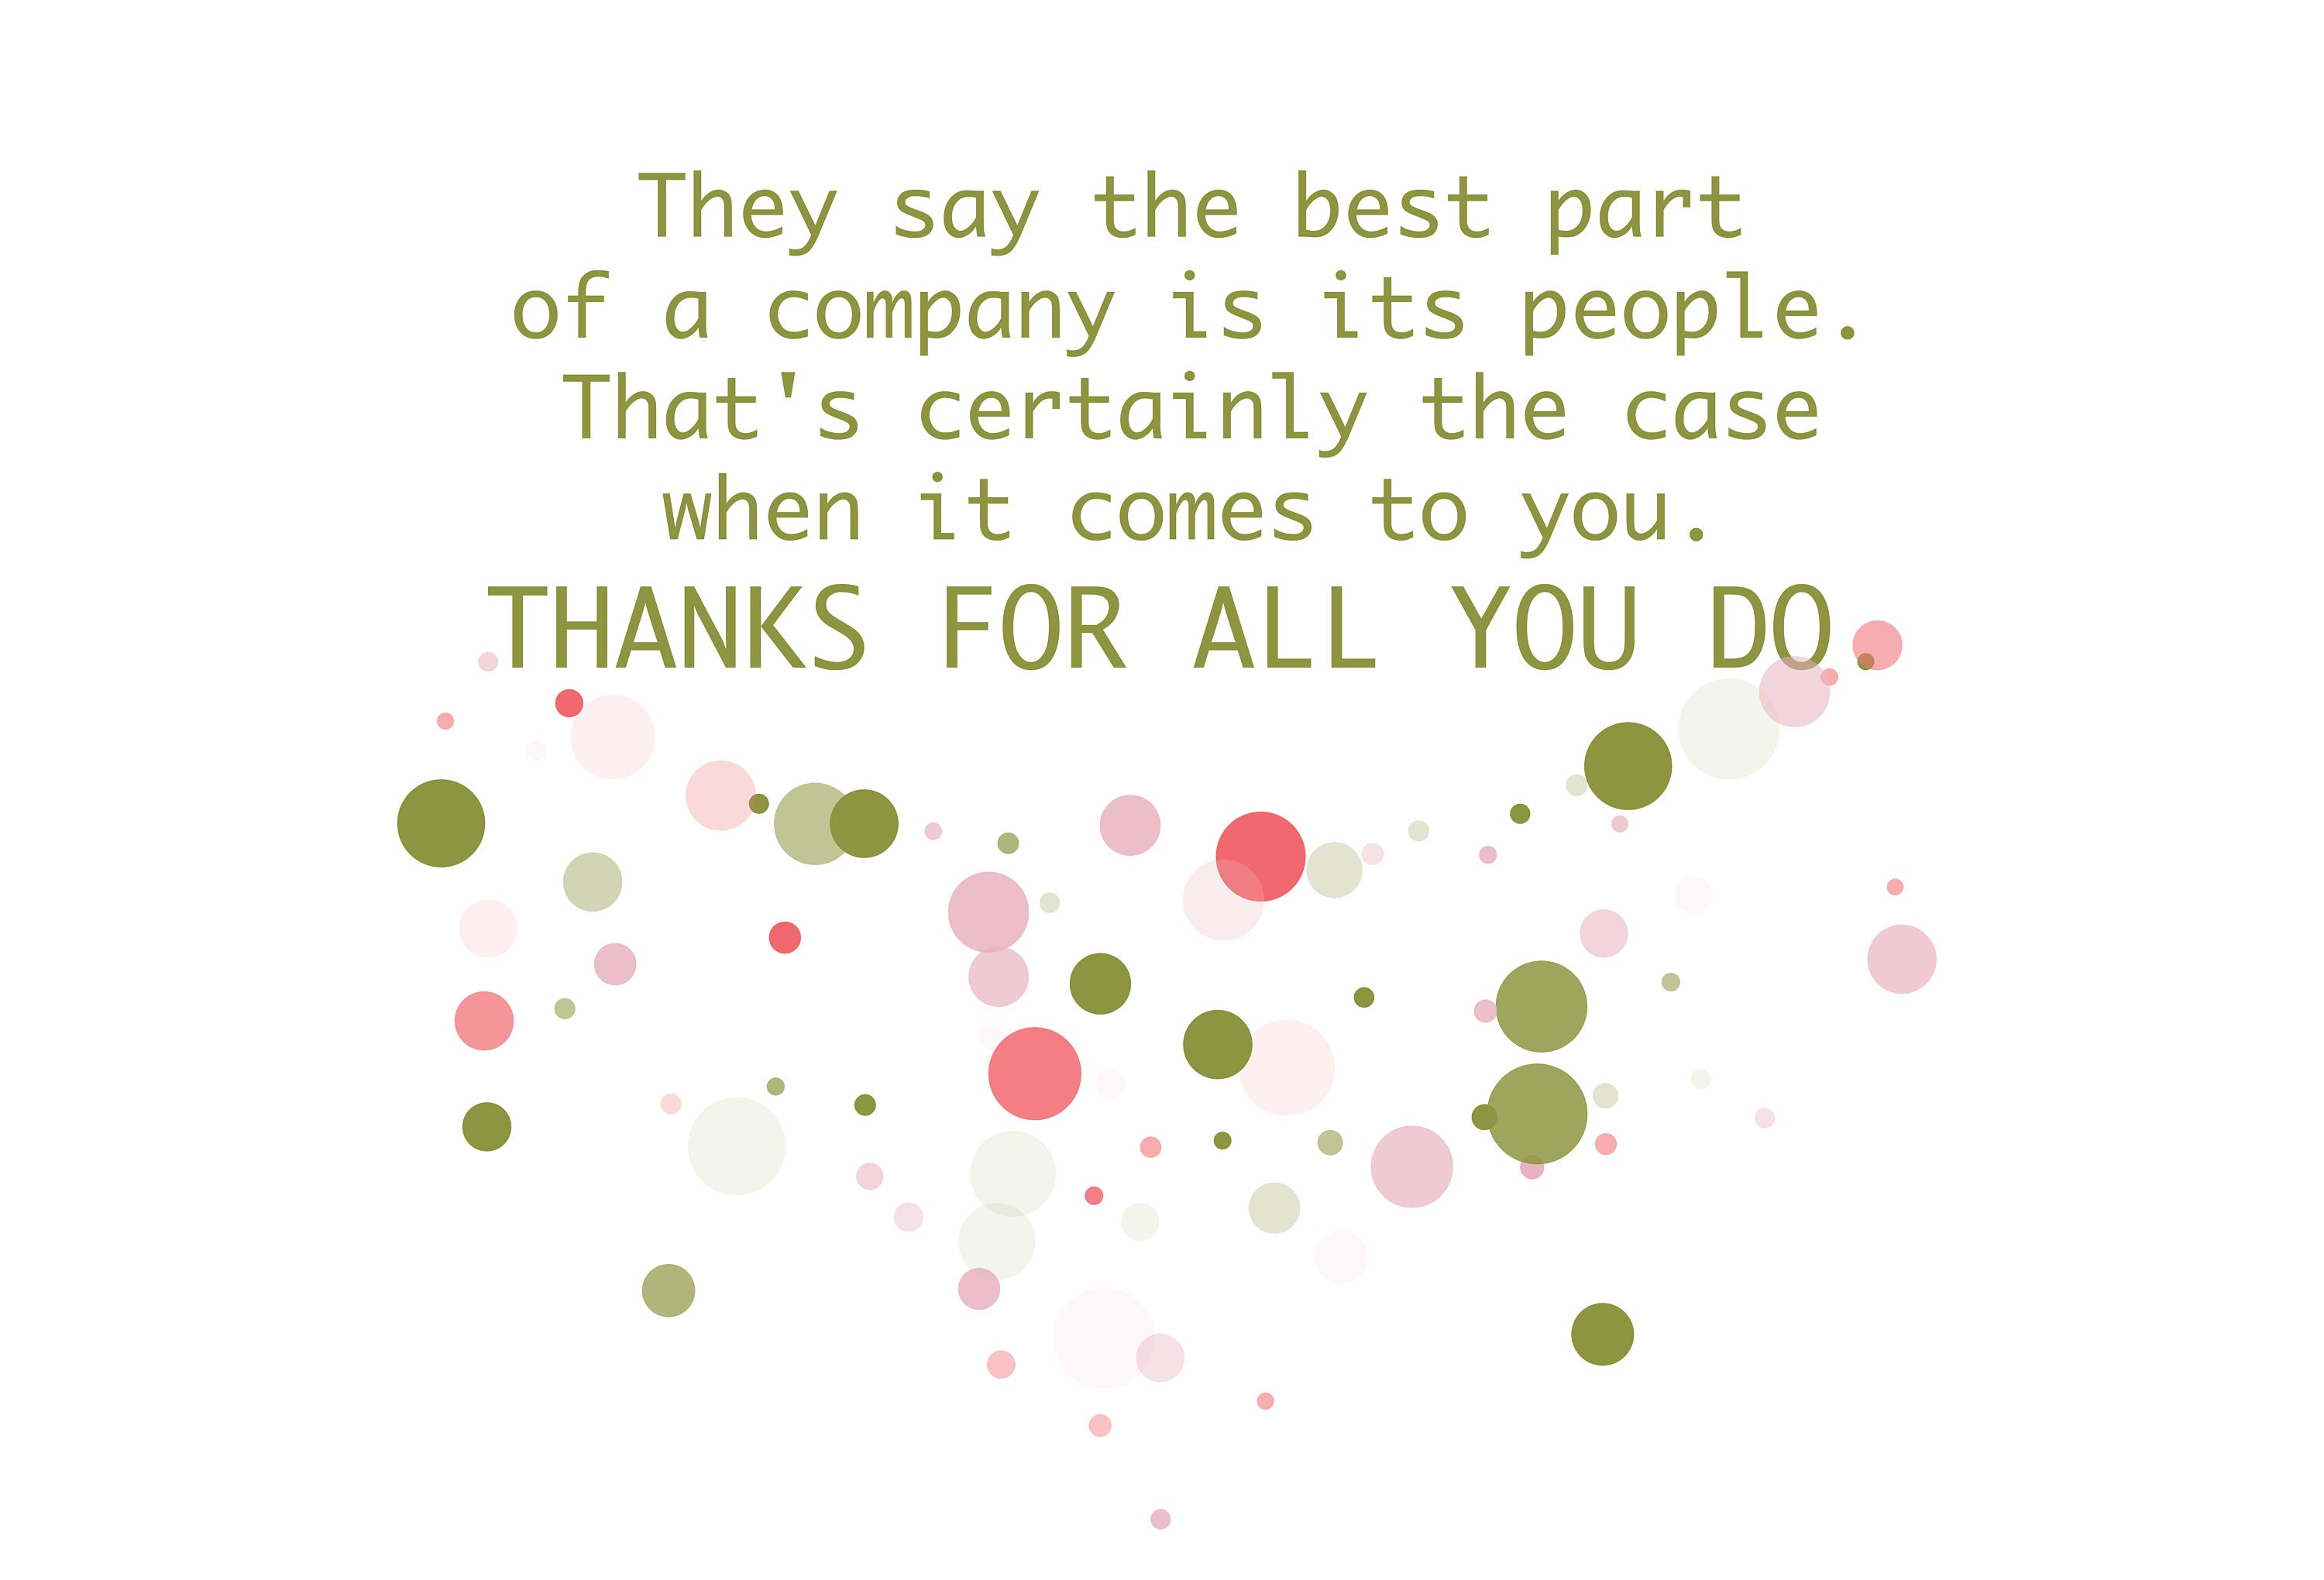 digital-employee-appreciation-card-wishes-instant-download-printable-at-home-pantone-colors